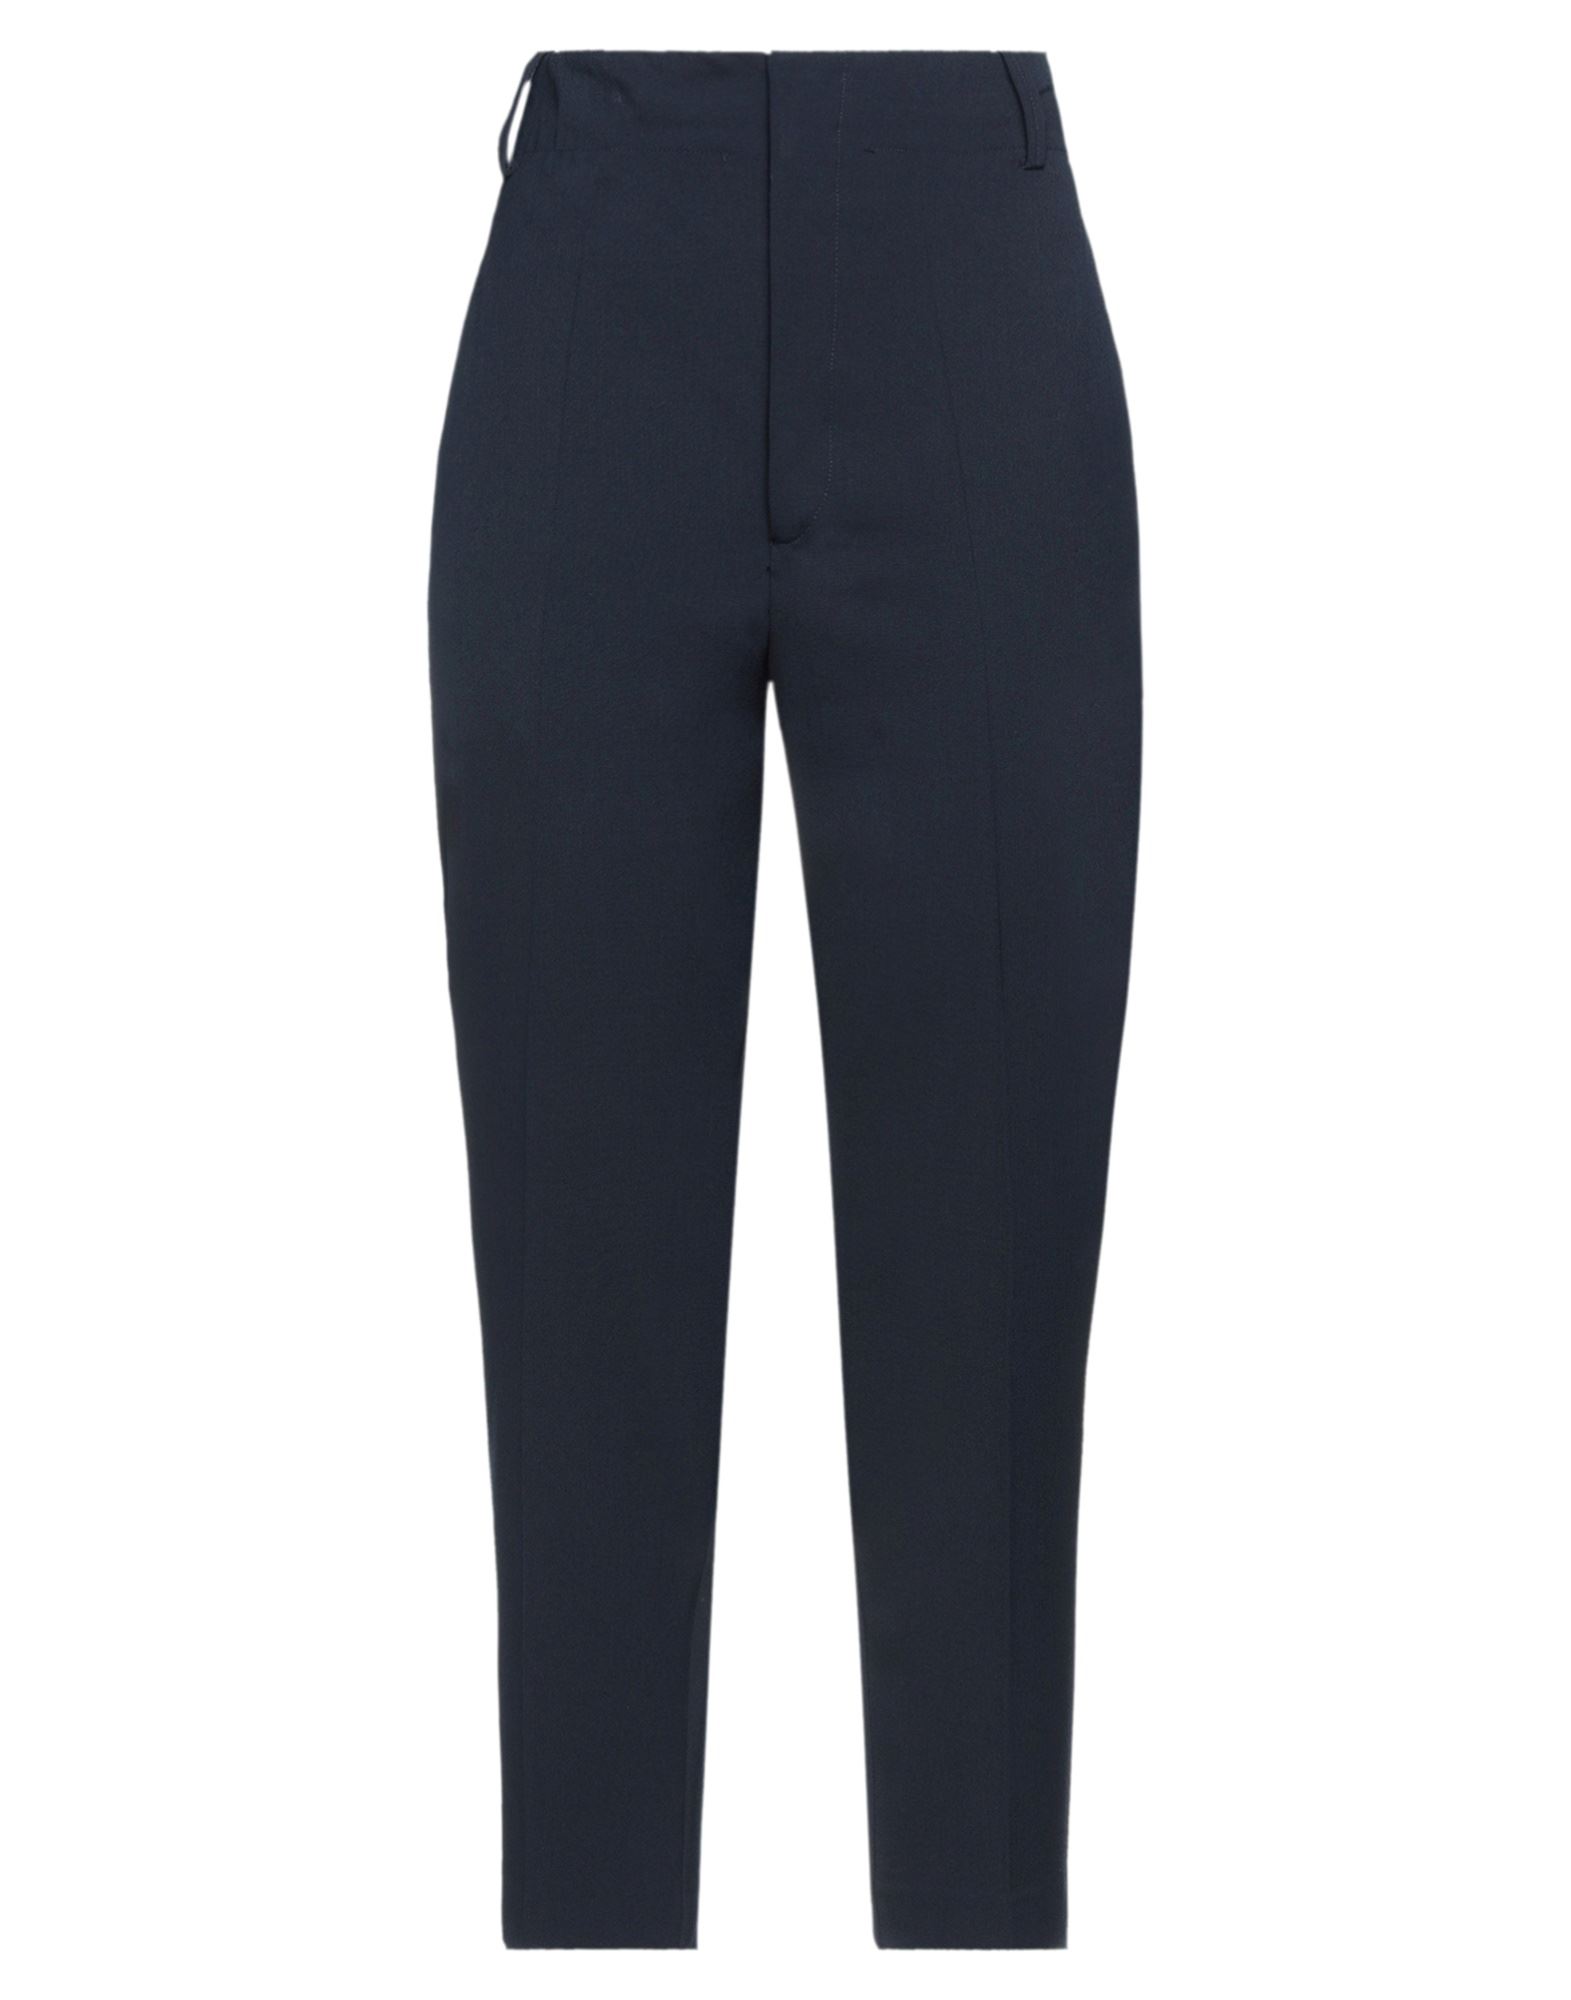 Jucca Woman Pants Midnight Blue Size 8 Polyester, Wool, Elastane